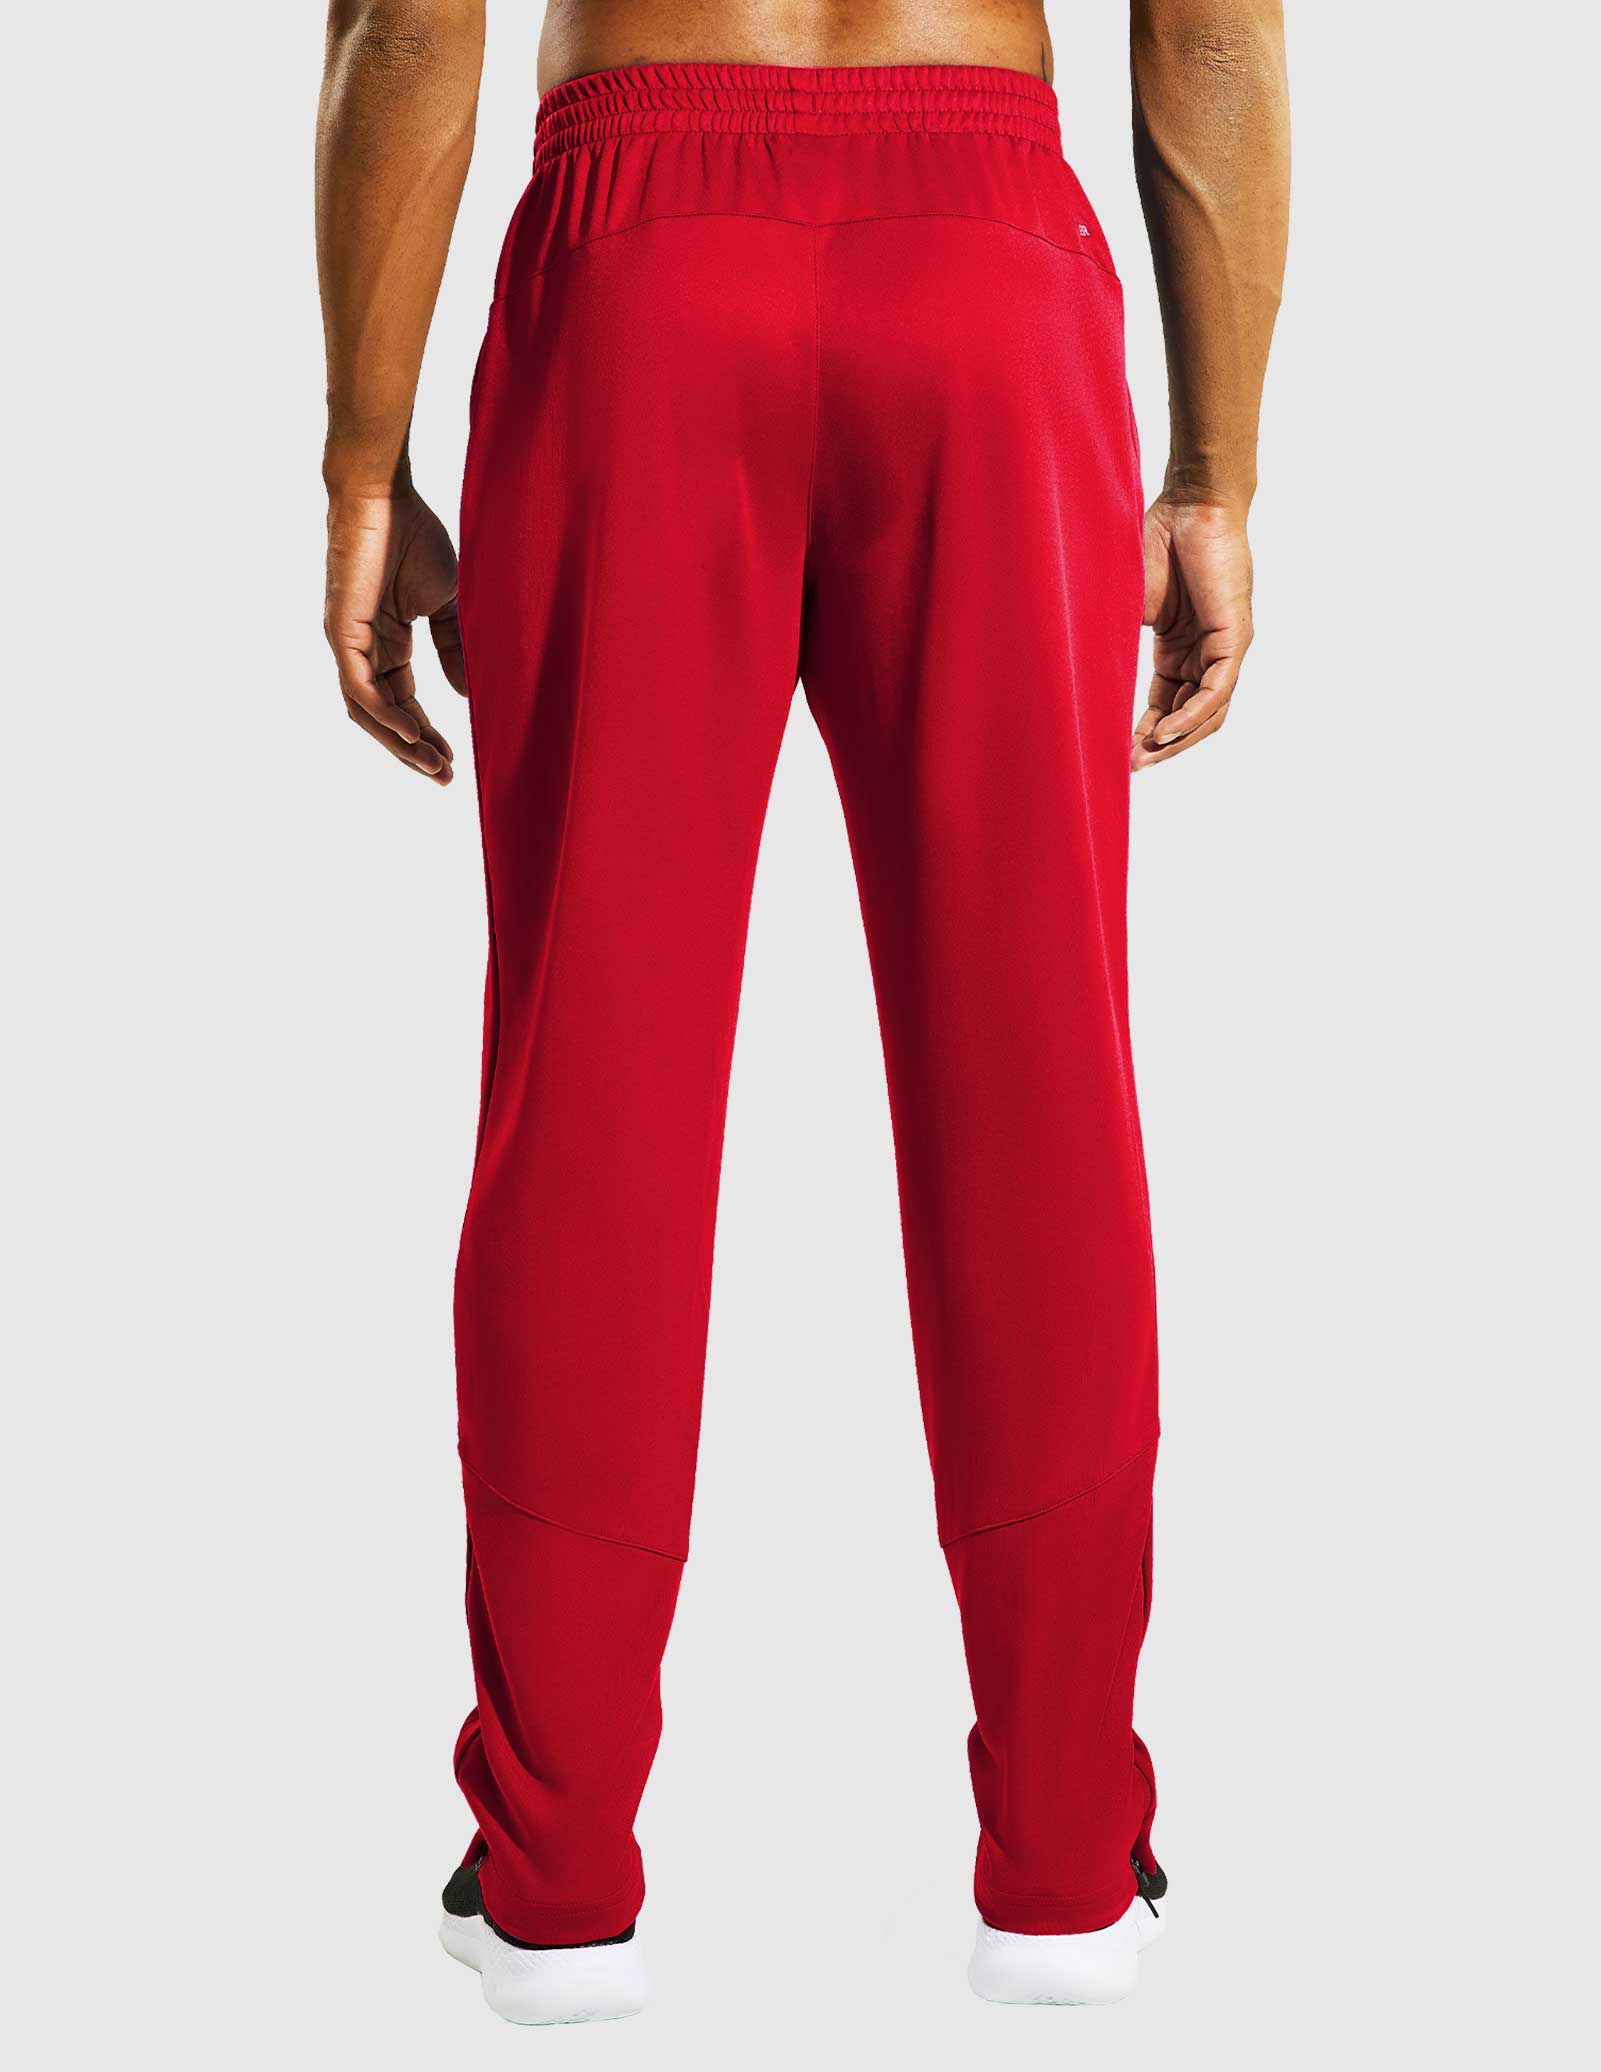 Men’s Sweatpants with Pockets Athletic Track Joggers